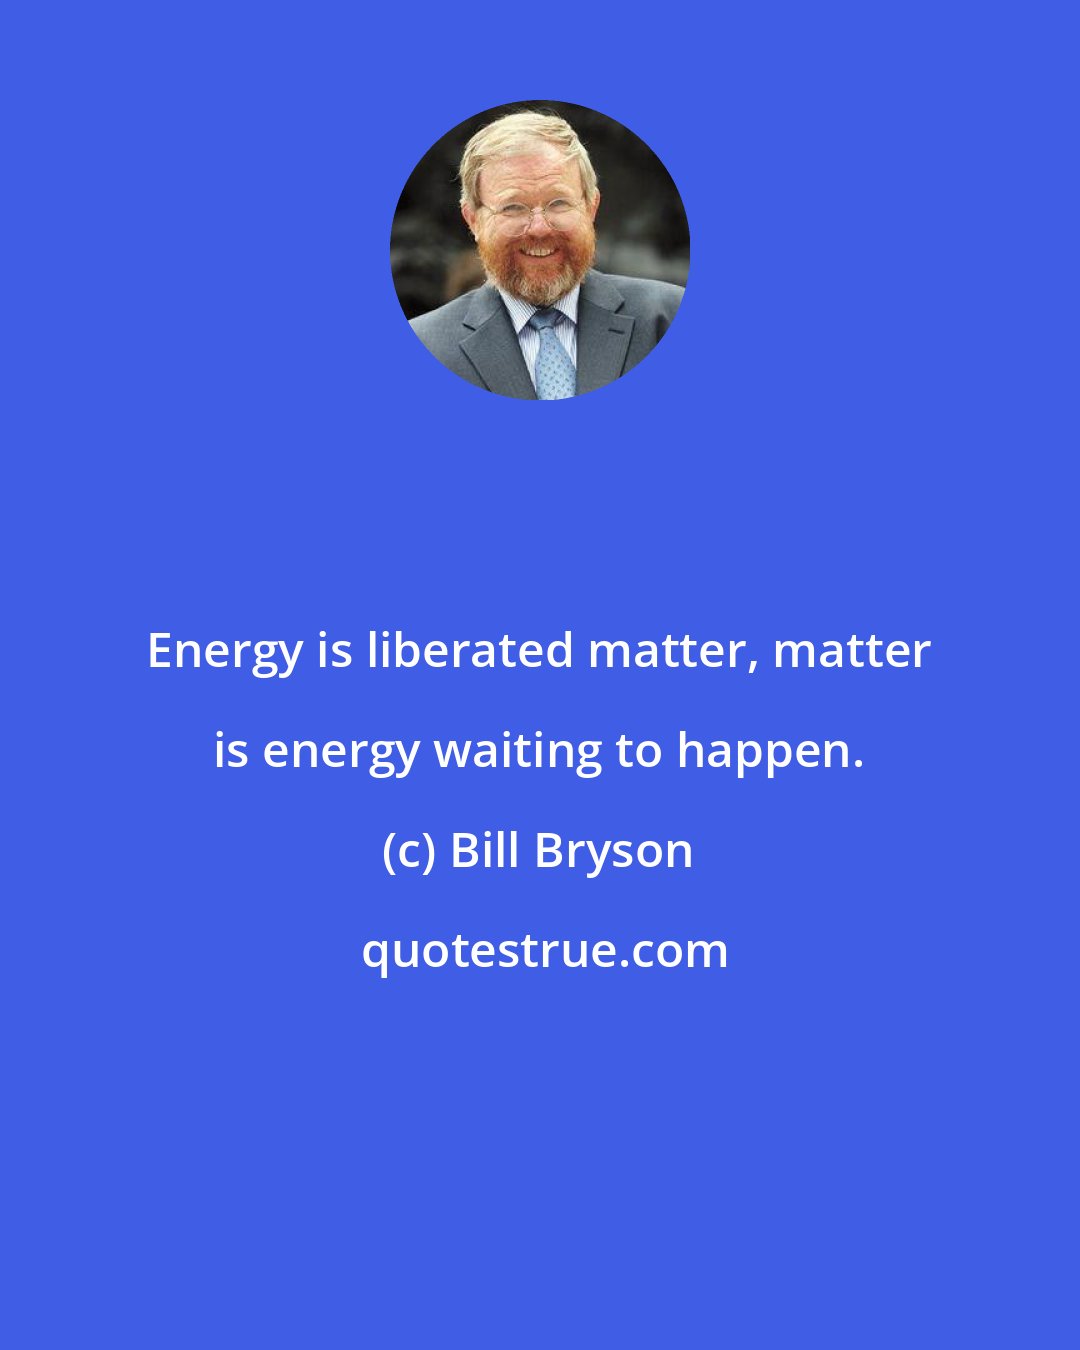 Bill Bryson: Energy is liberated matter, matter is energy waiting to happen.